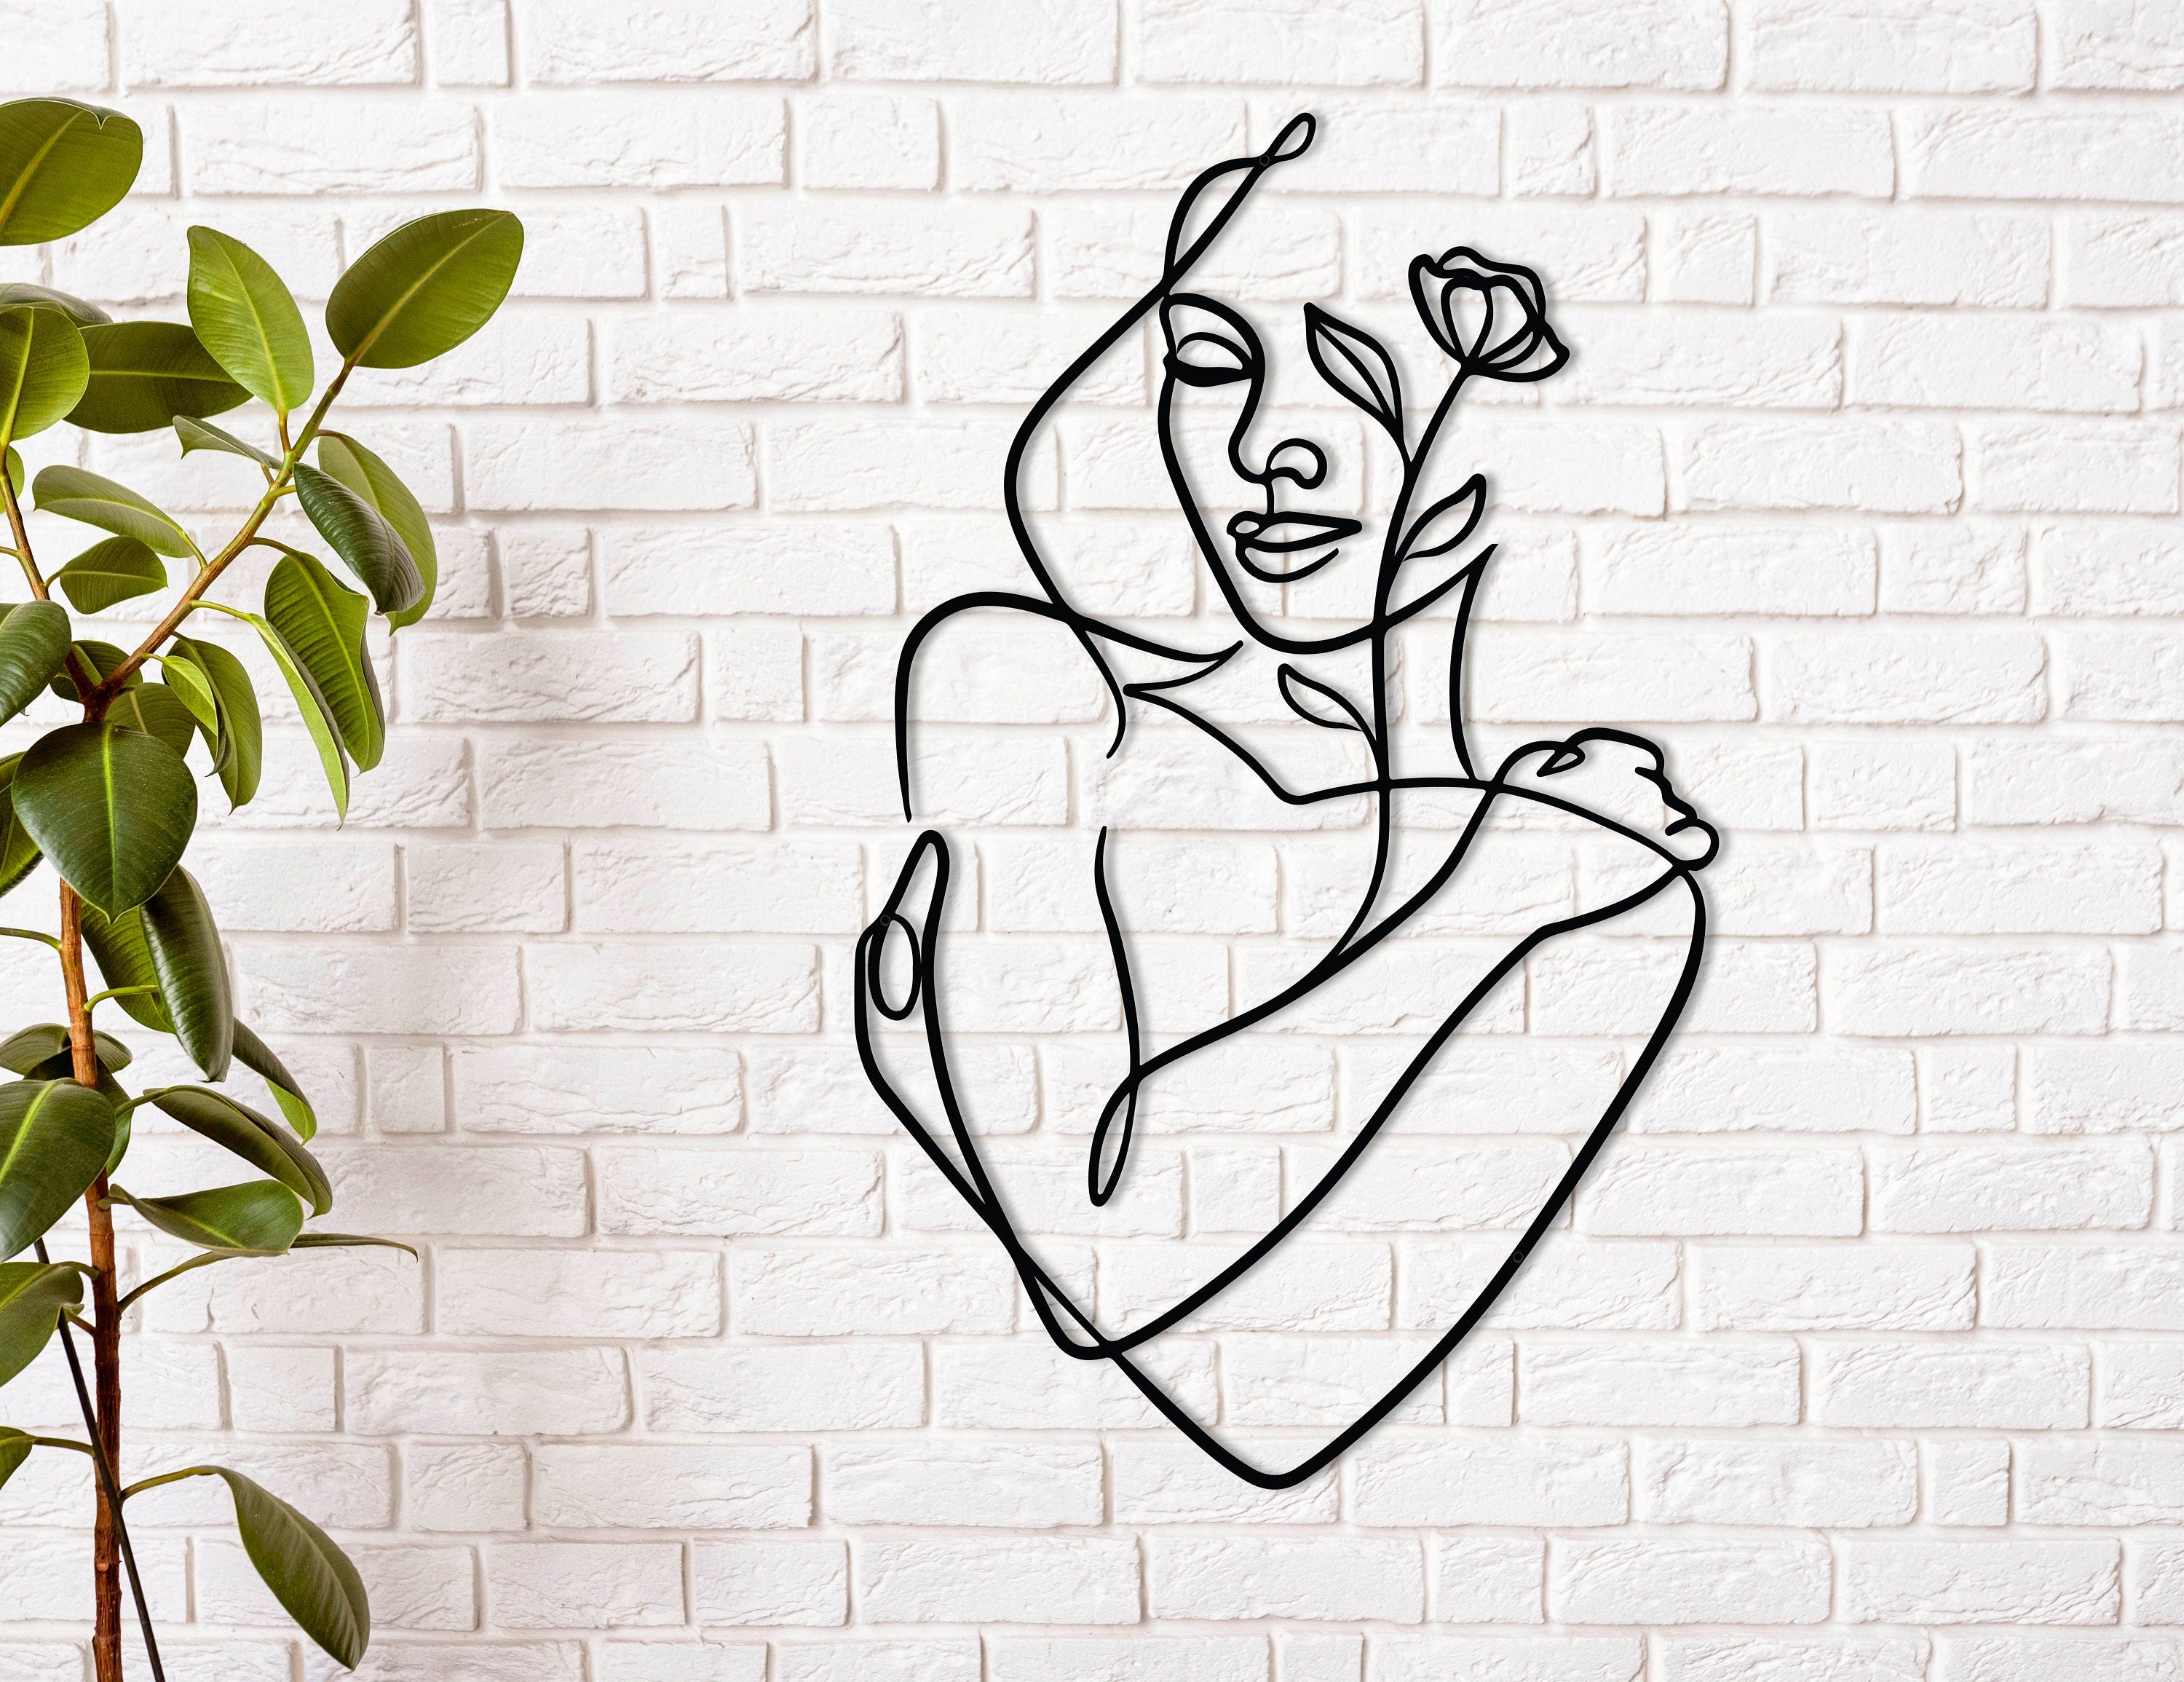 Minimalist Naked Woman Wall Decor, Minimalist Wall Art, Flower Wall Decor, Abstract Wall Decor,  Unique Over The Bed Decor, Home Decore